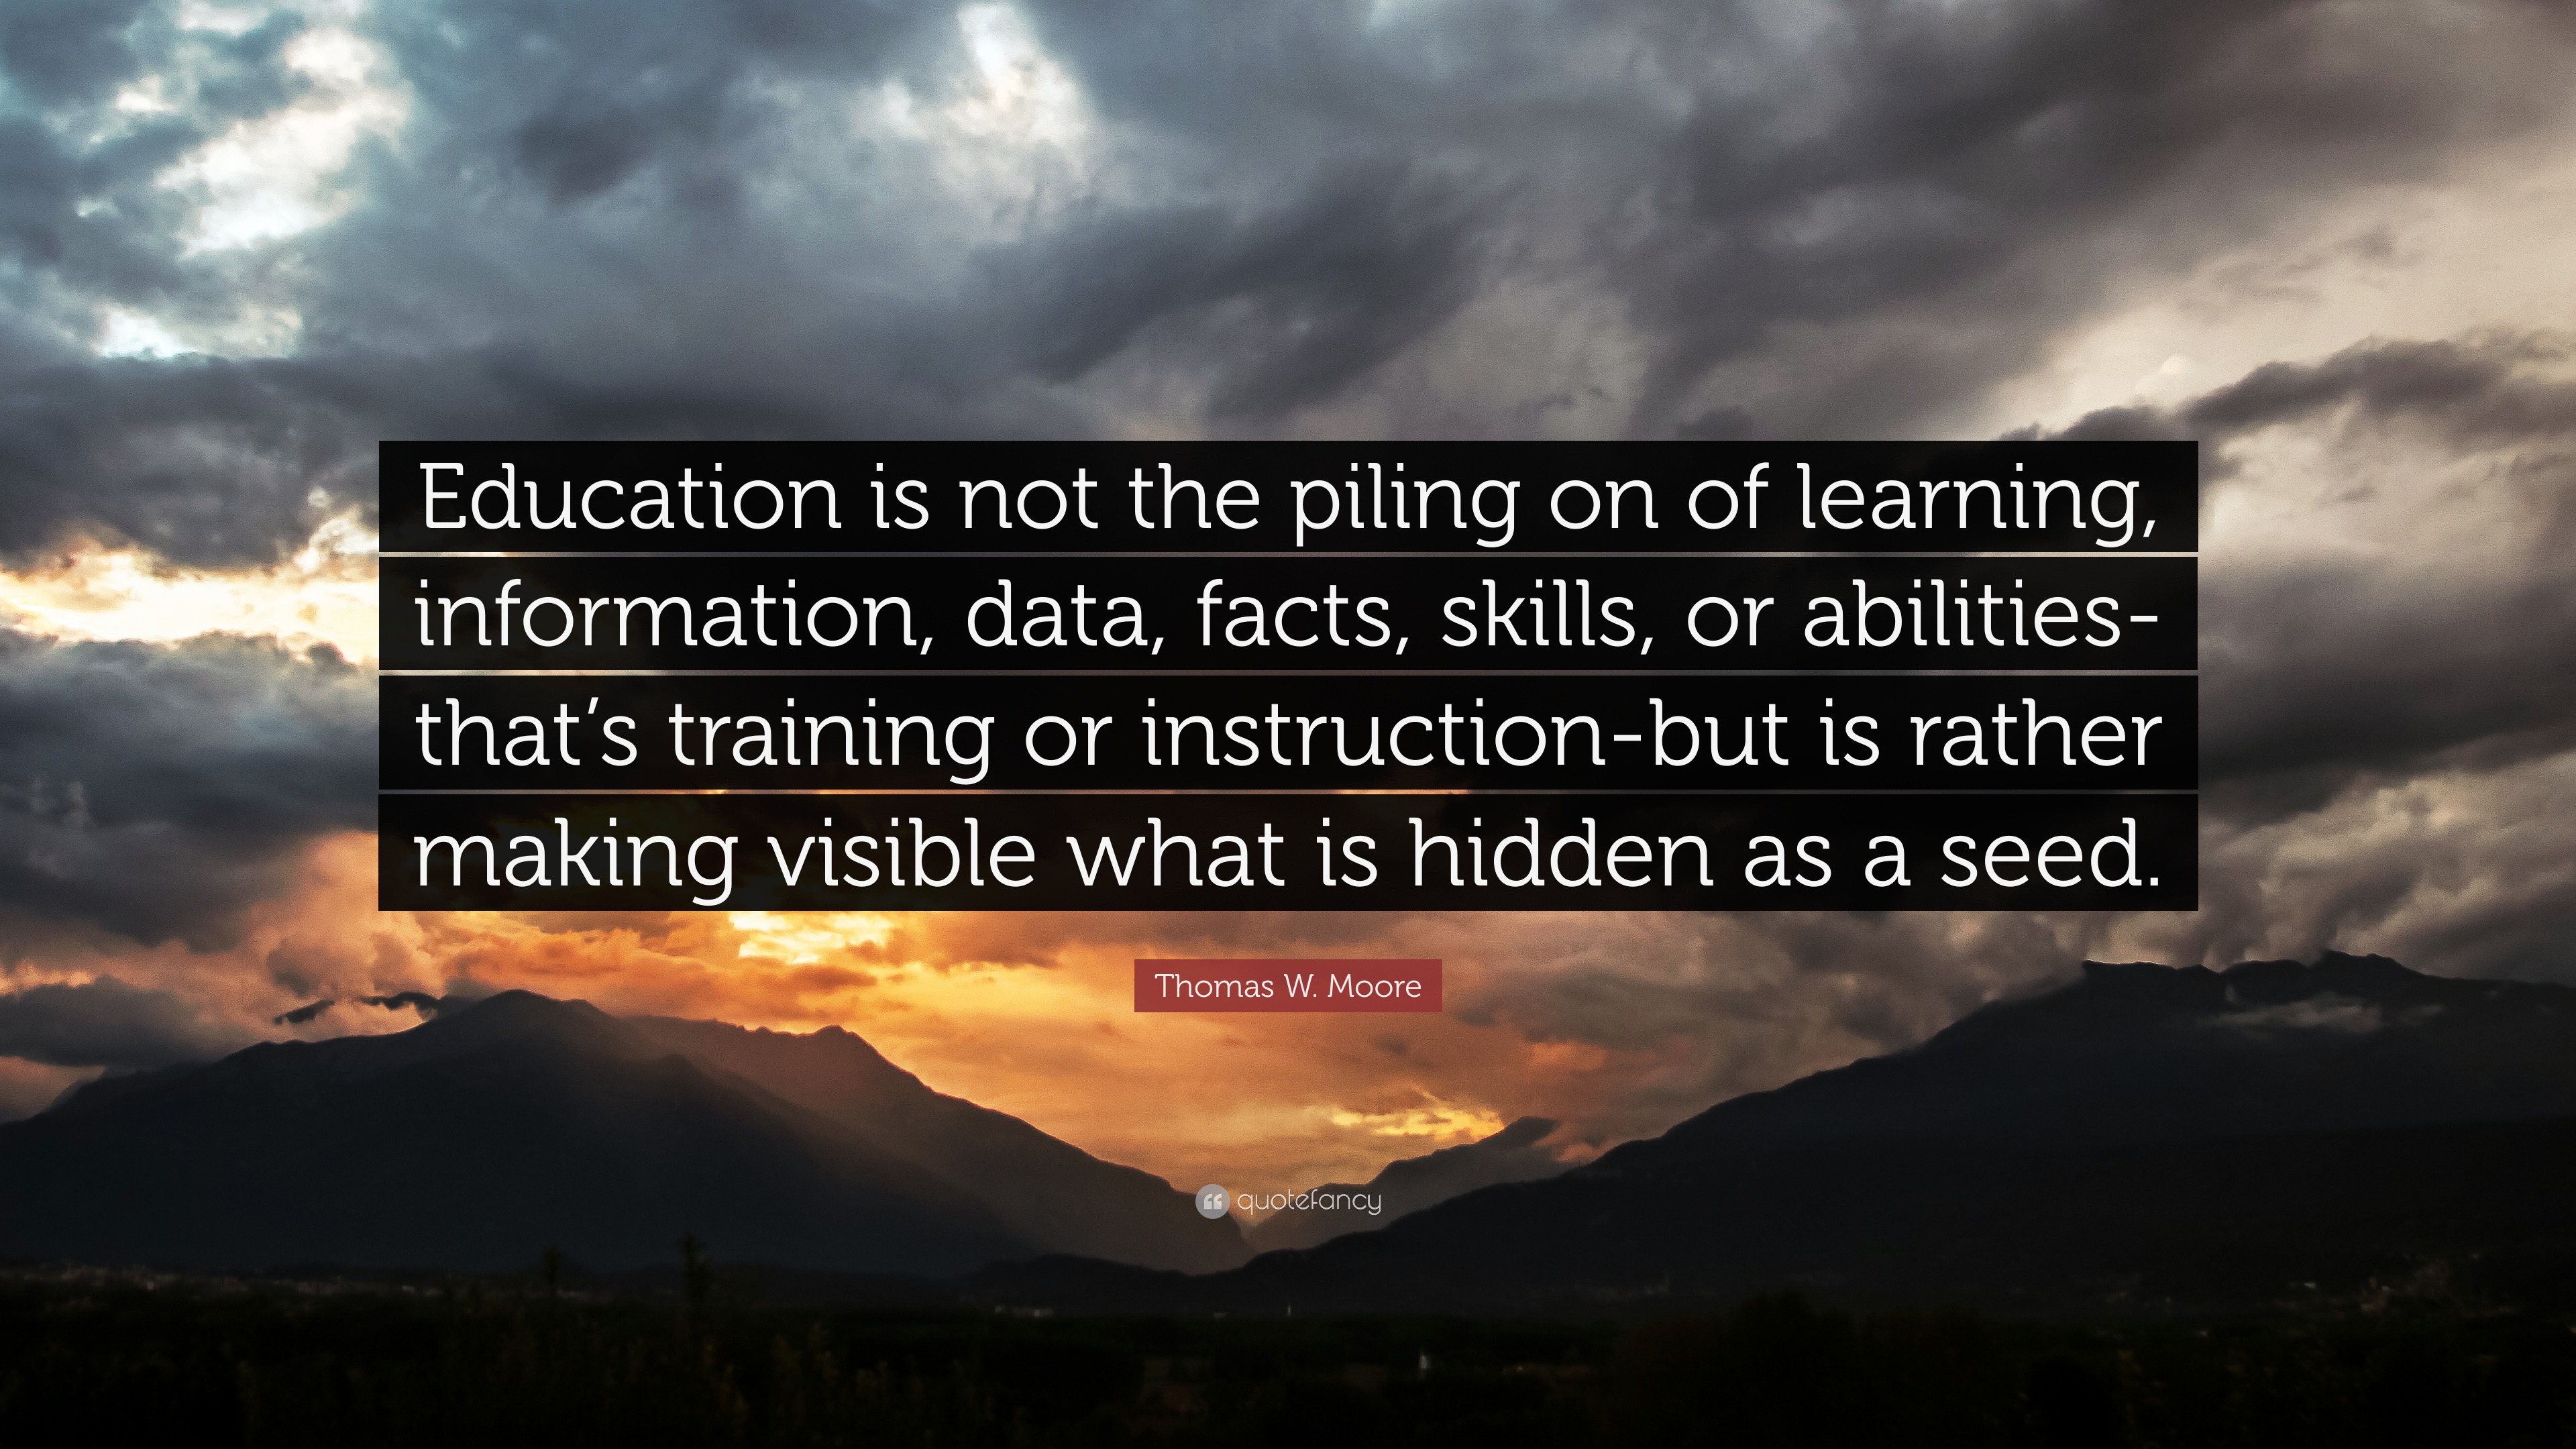 Thomas W. Moore Quote “Education is not the piling on of learning